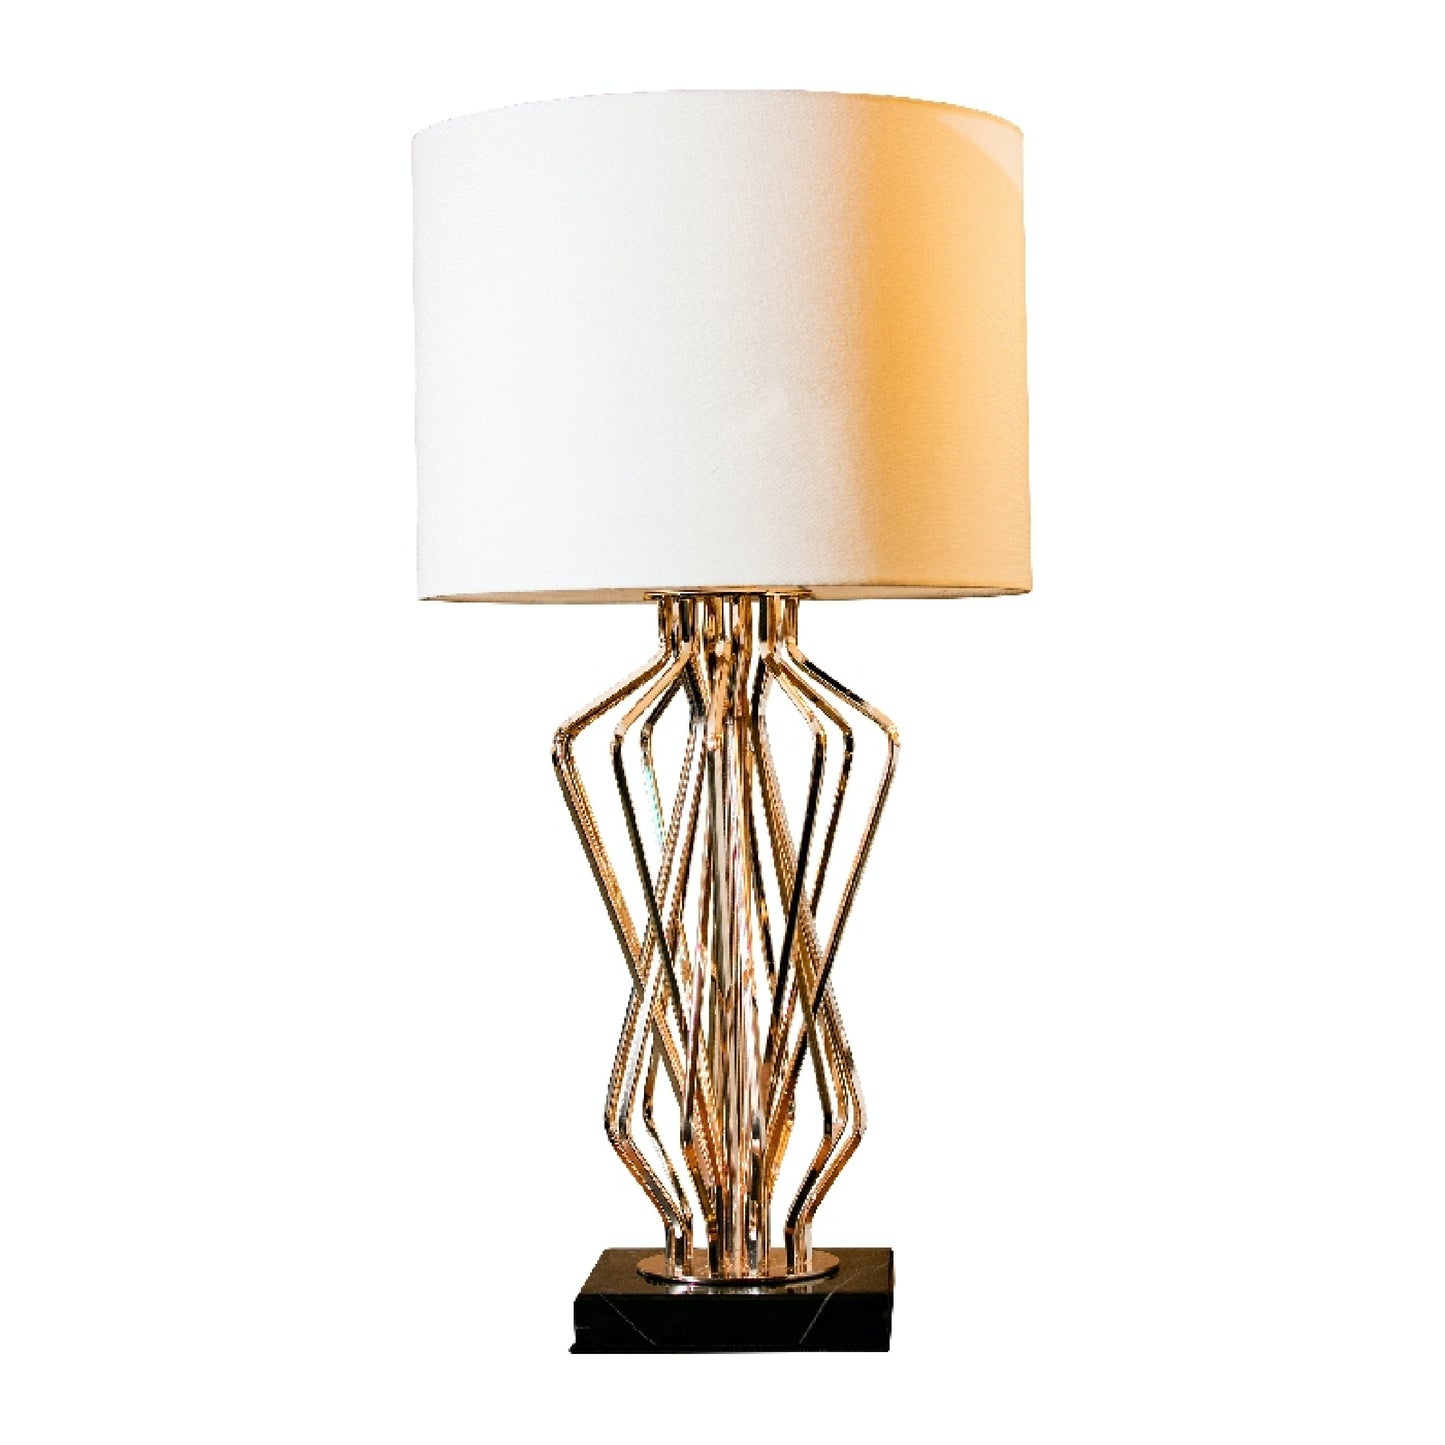 Modern Table Lamp Gold Table Lamp, Lamps fixture for Indoor Home - Spot Light Inc